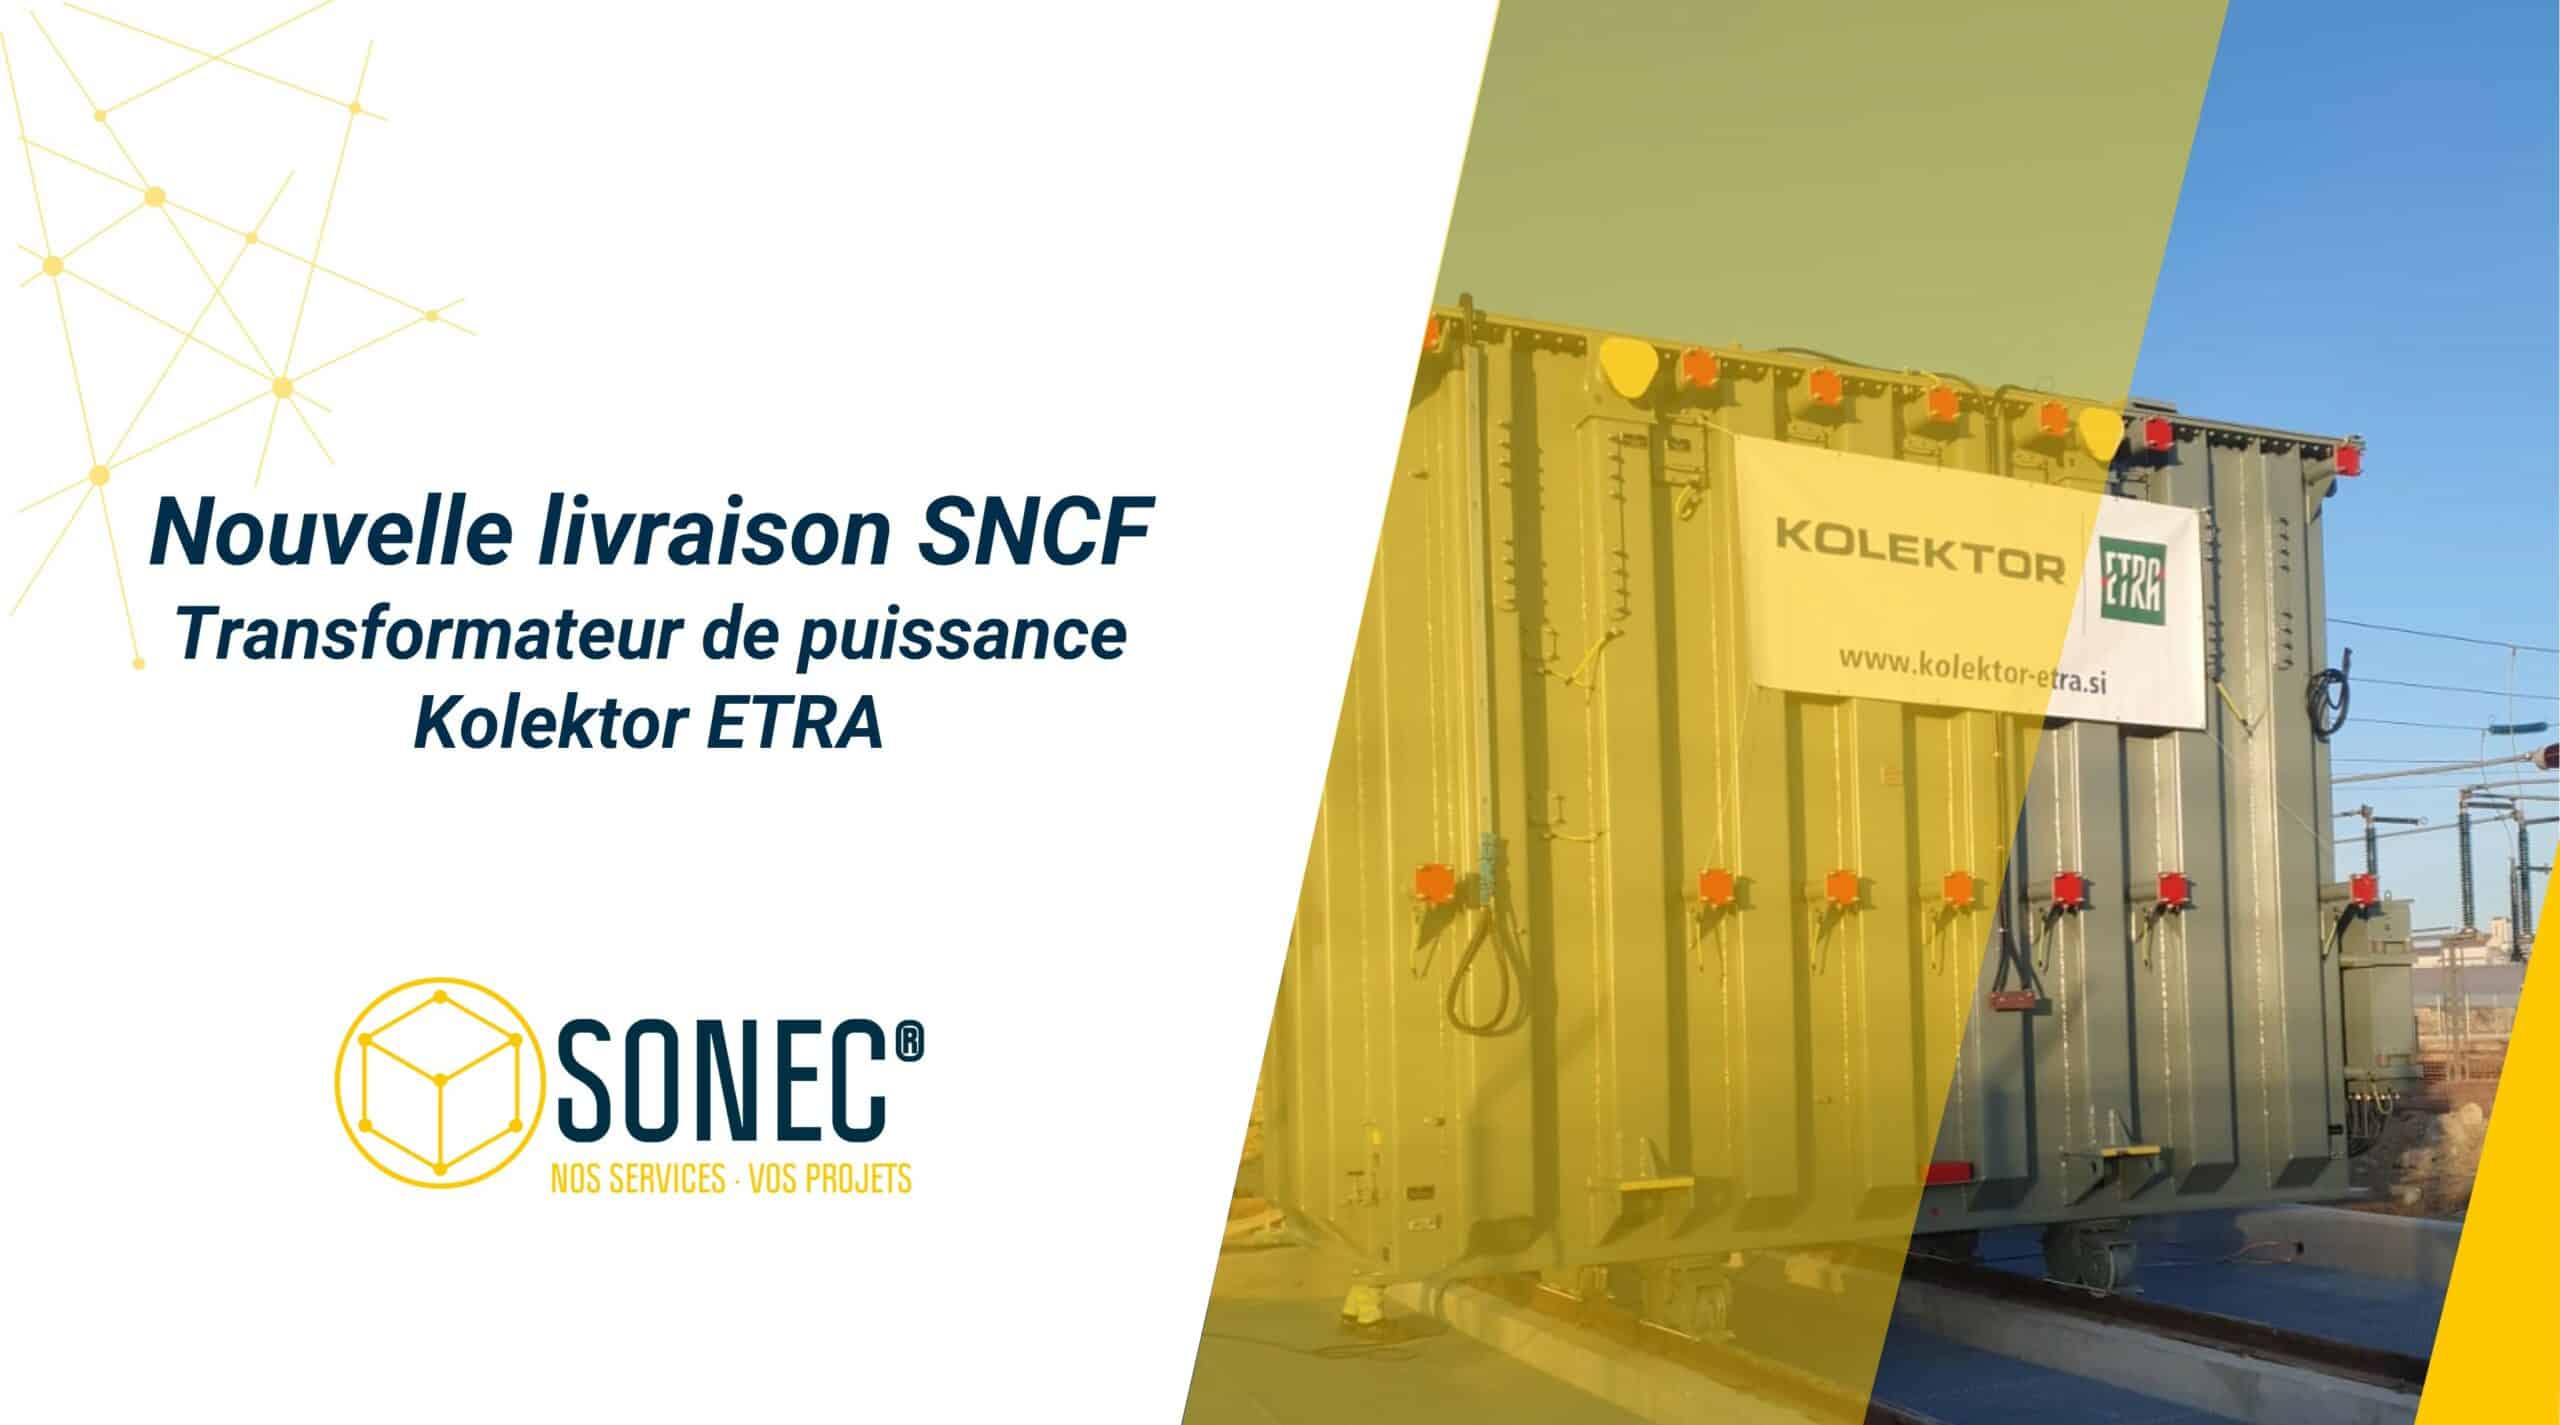 Sonec project for SNCF: delivery of a Kolektor ETRA power transformer